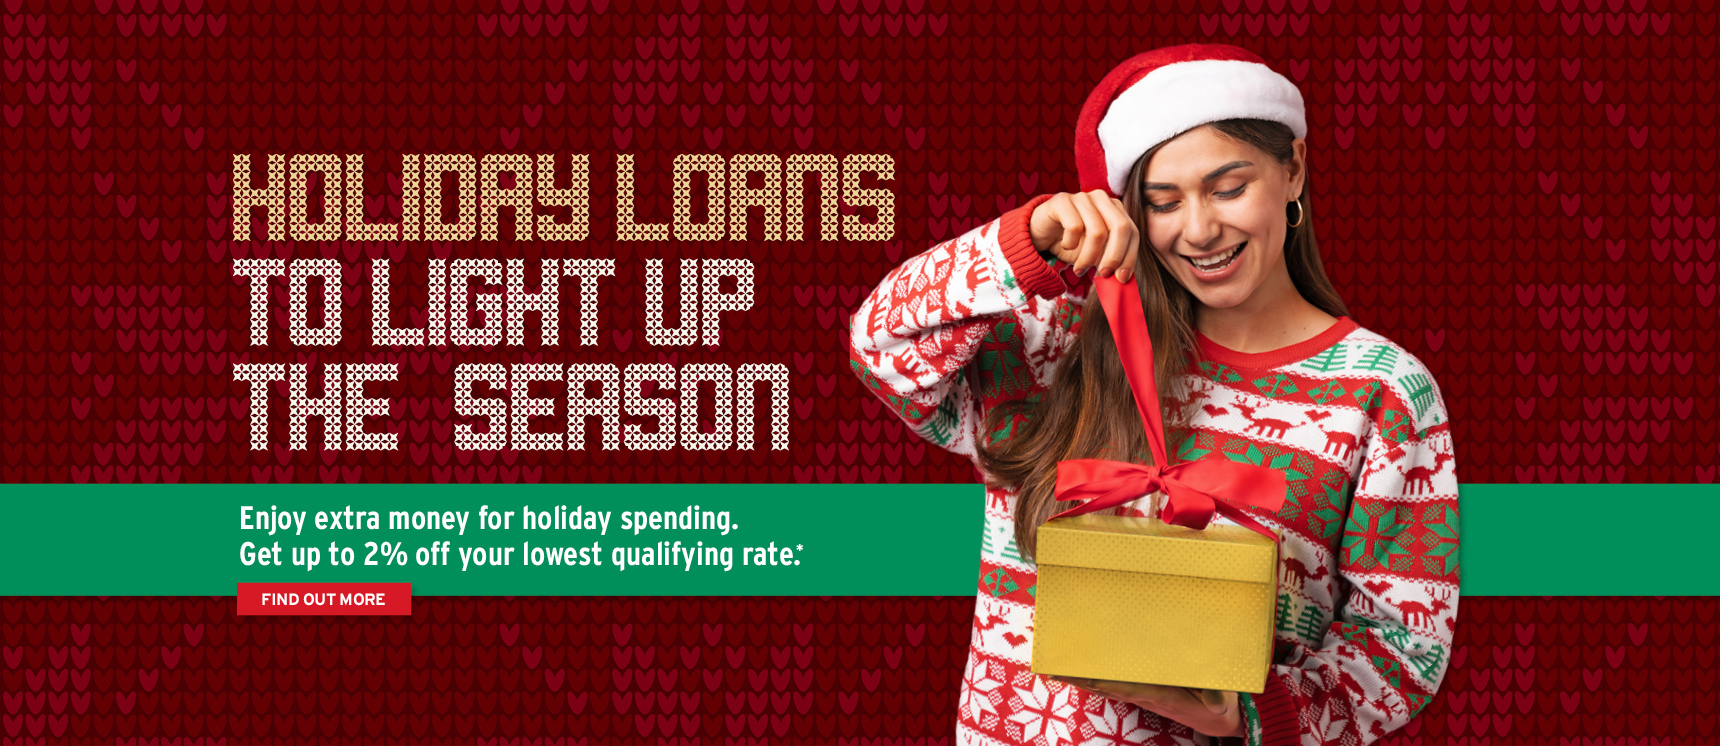 Happy woman opening up holiday gift with 2% off lowest qualifying holiday loan rate promotion